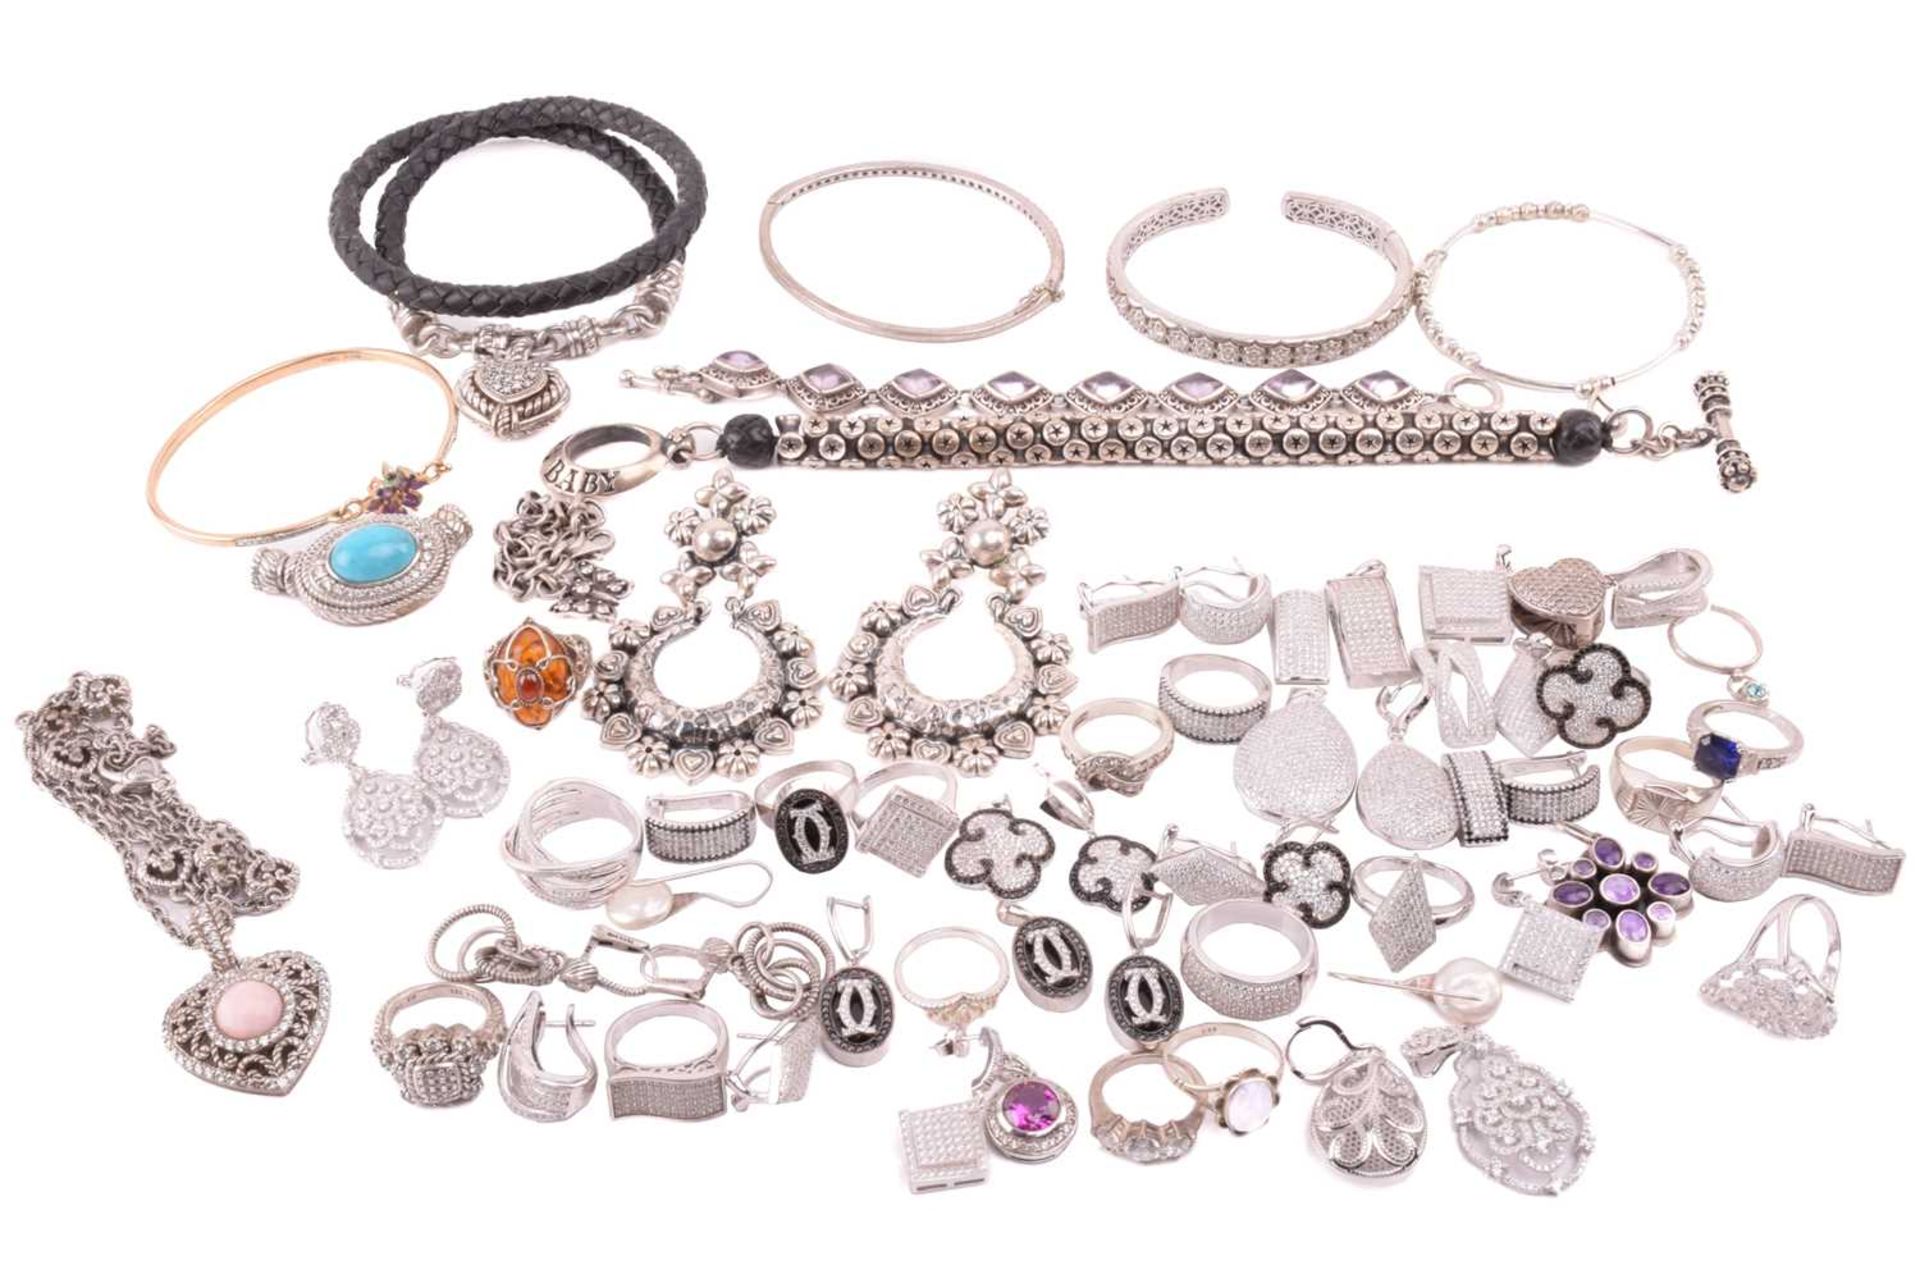 A collection of jewellery in white metal, including Thai pendants, earings and rings in white